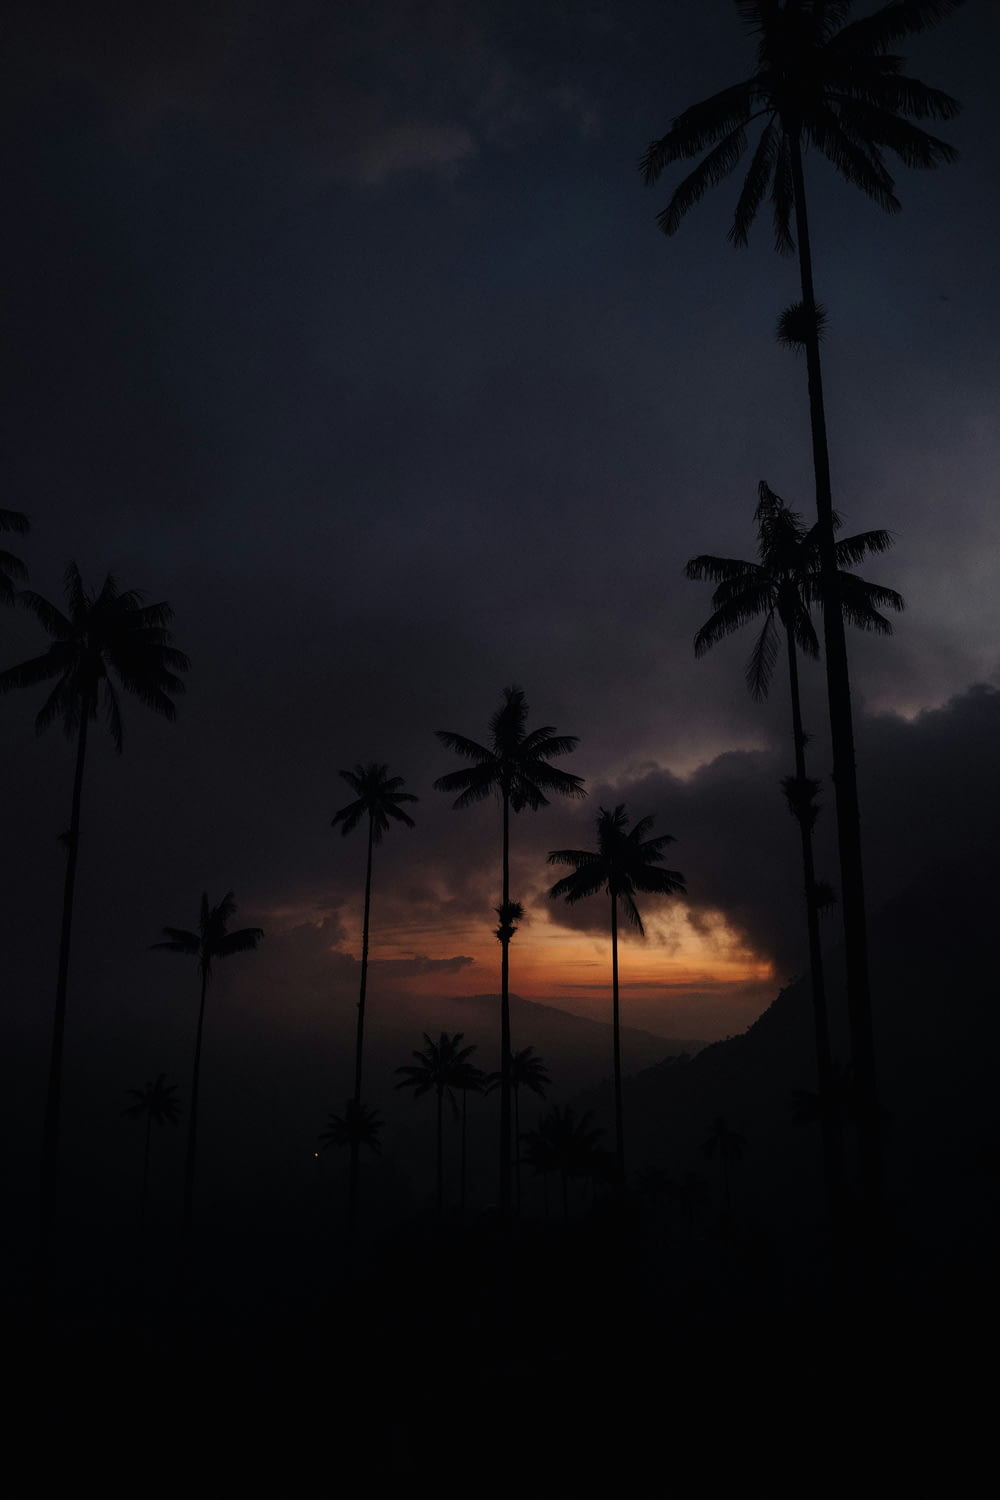 palm trees are silhouetted against a dark sky